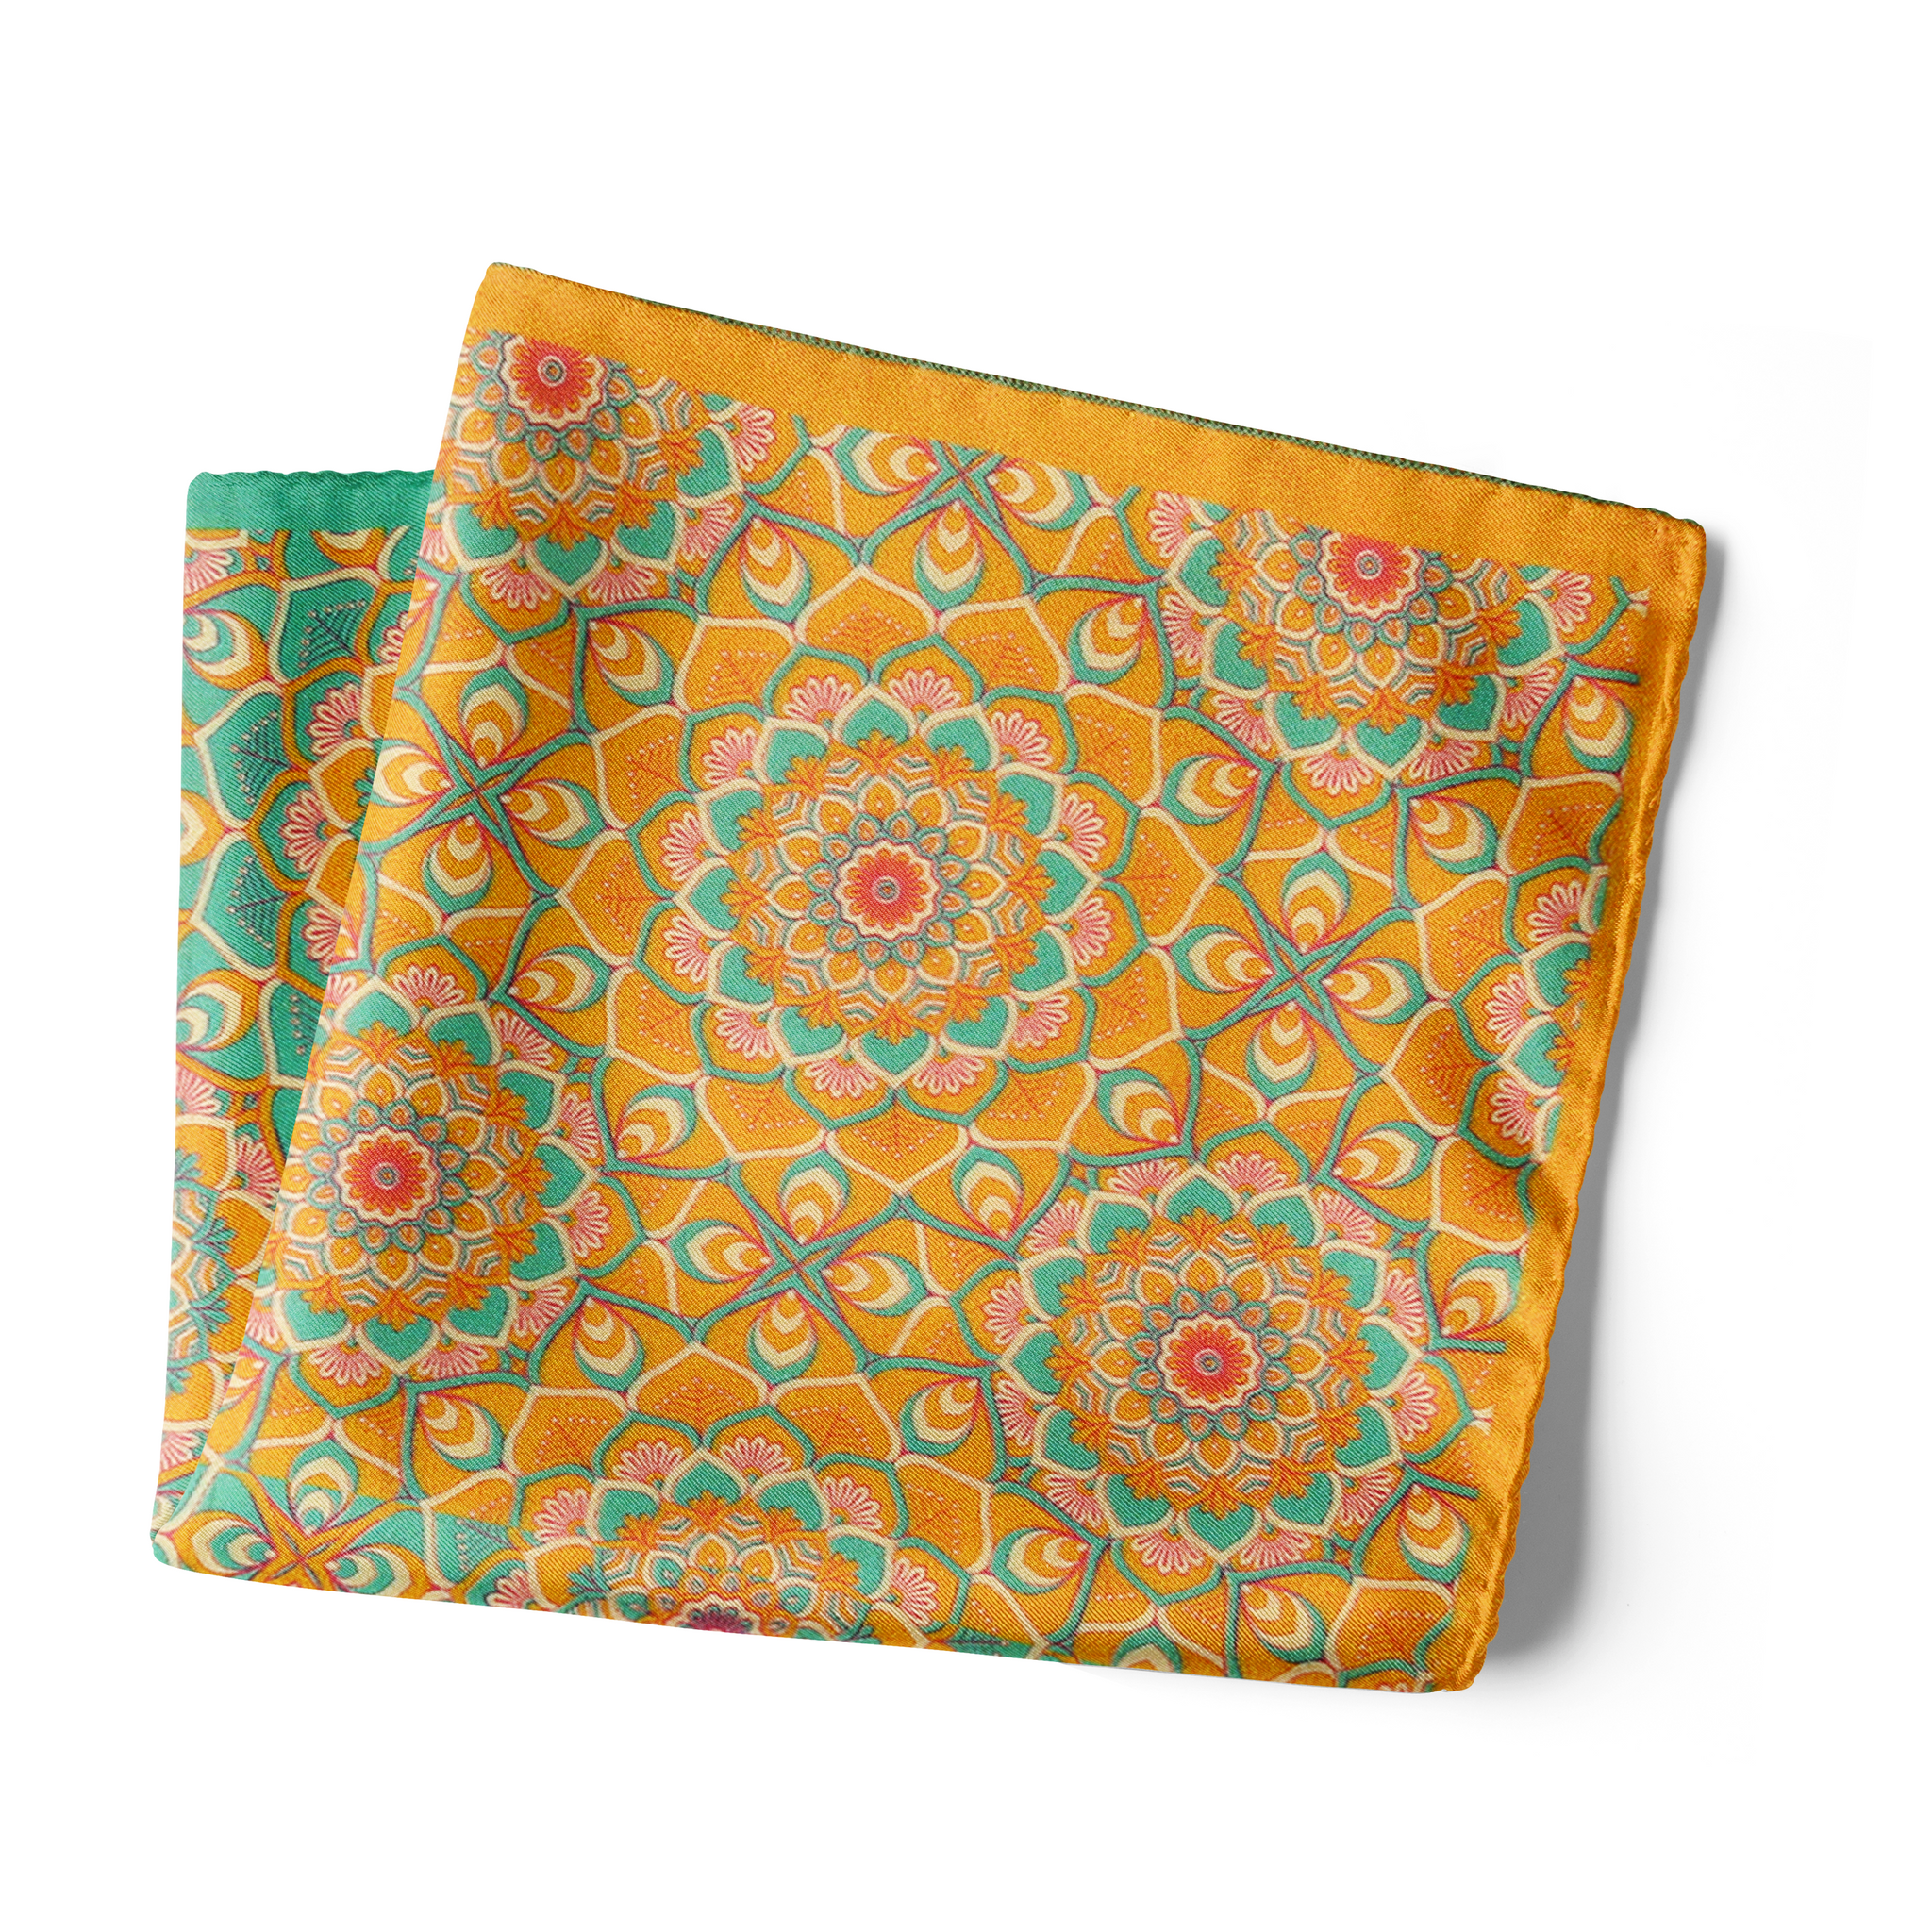 Chokore Men’s Silk 2-in-1 Pocket Square Indian At Heart Line (Sea Green and Orange)